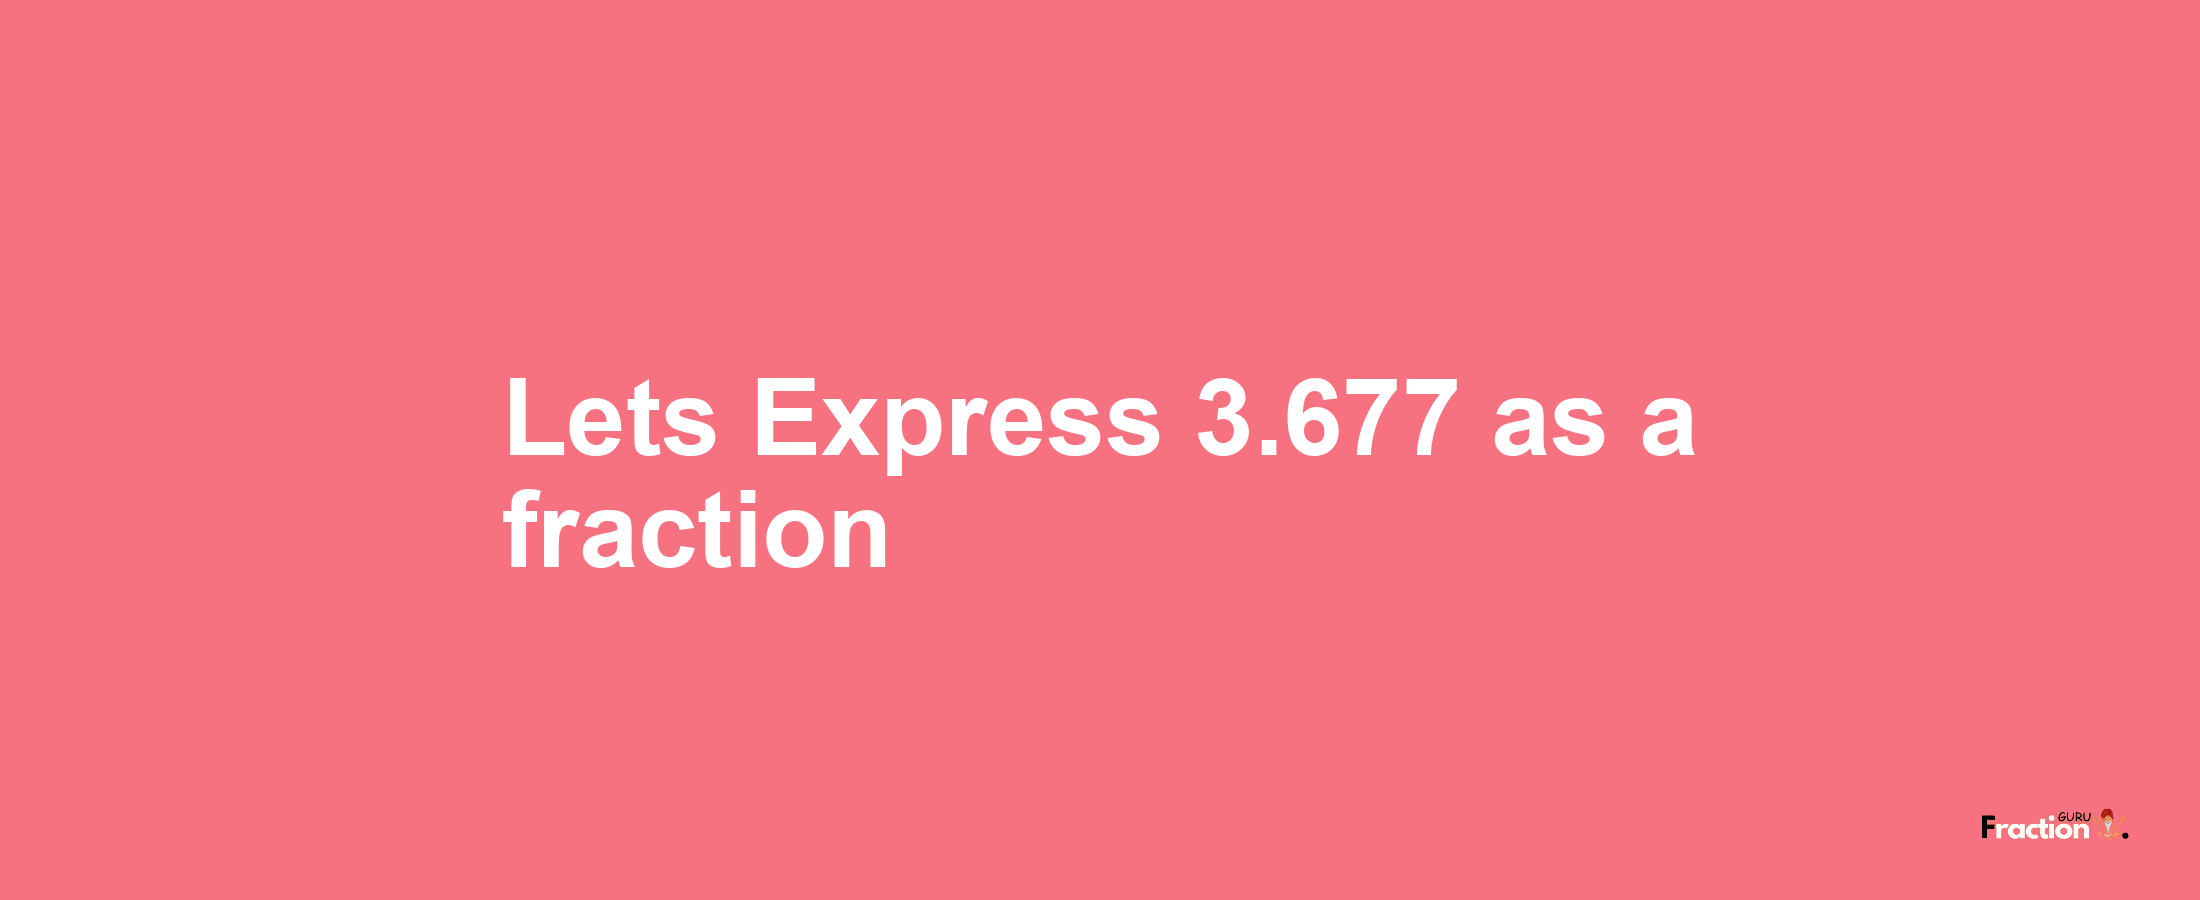 Lets Express 3.677 as afraction